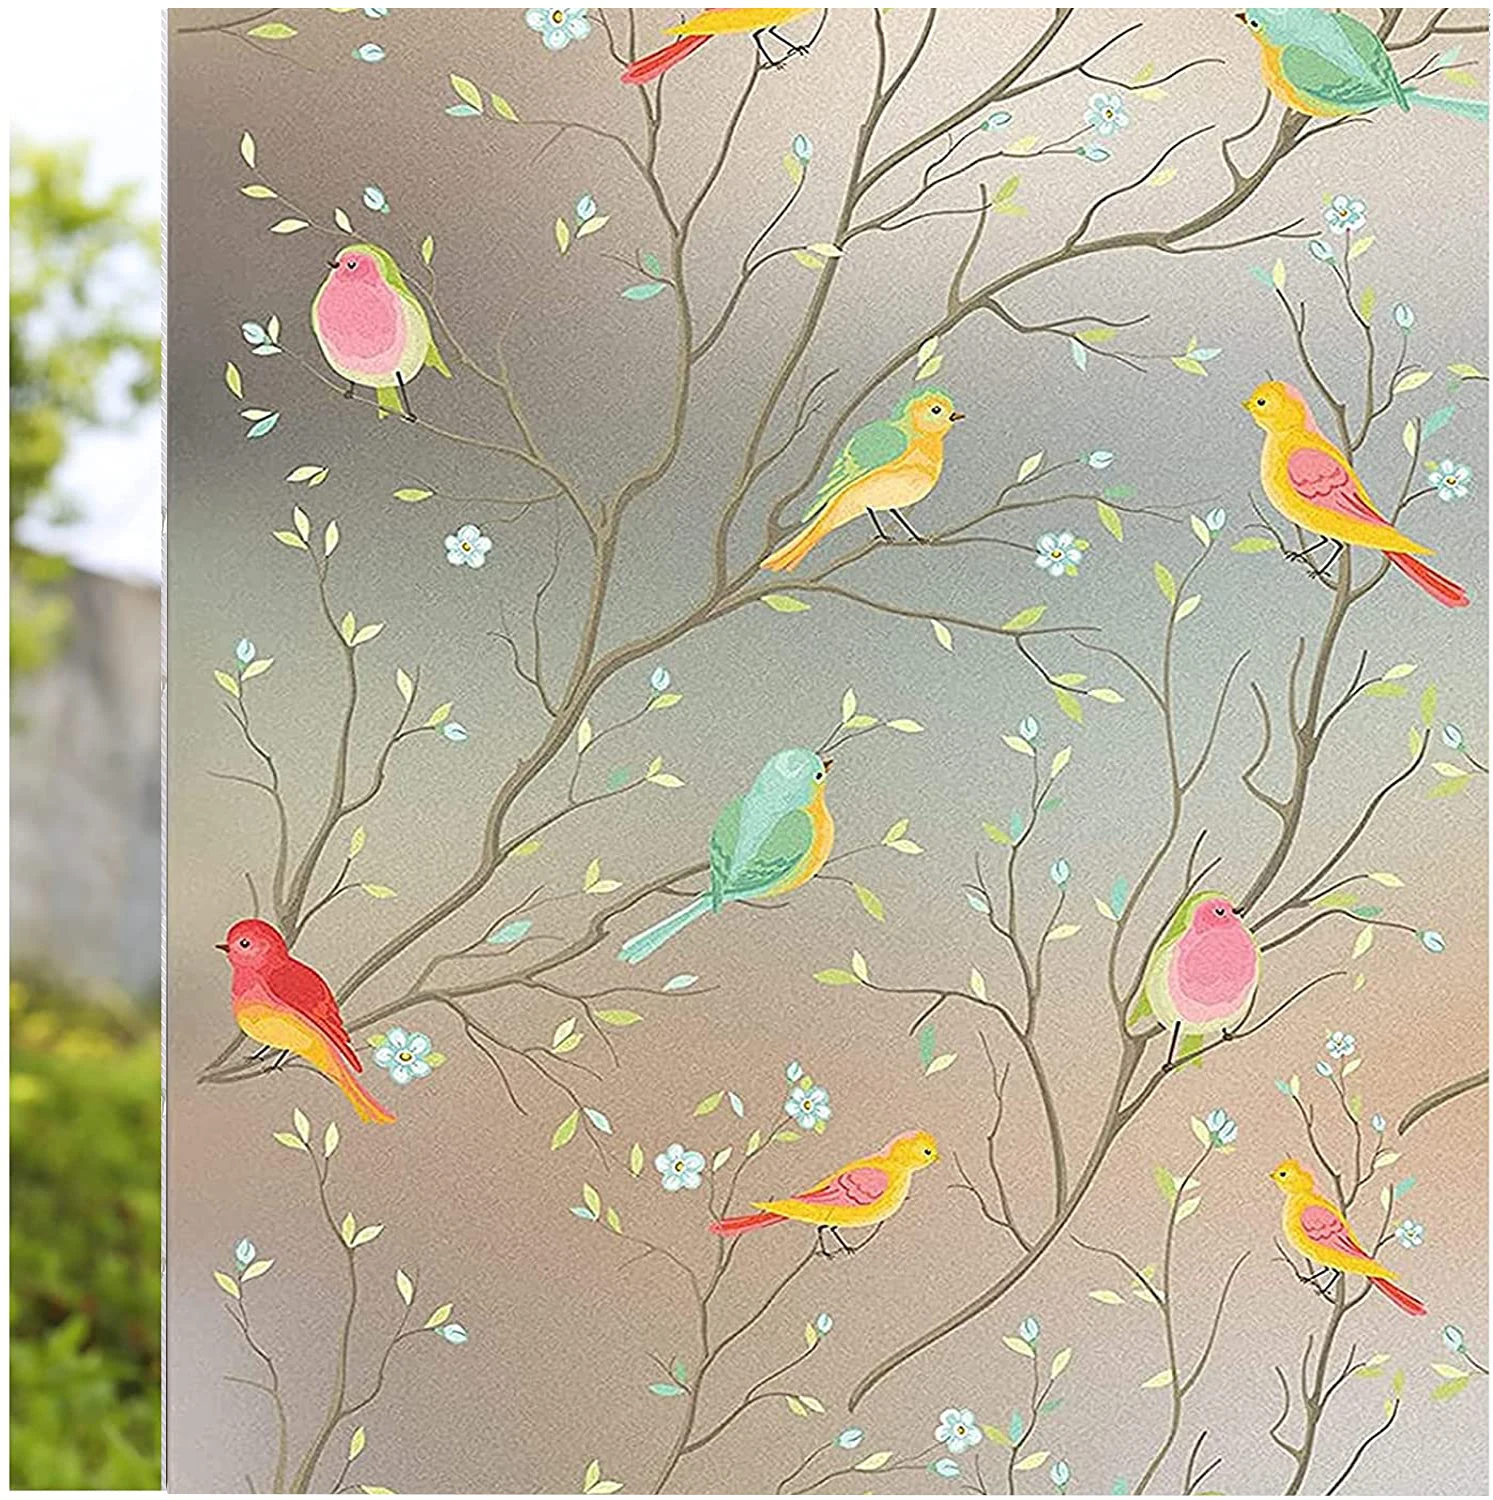 

LUCKYYJ Privacy Window Film Opaque Self-adhesive Bird Decals Decorative Glass Covering Static Cling Tint Frosted Window Stickers